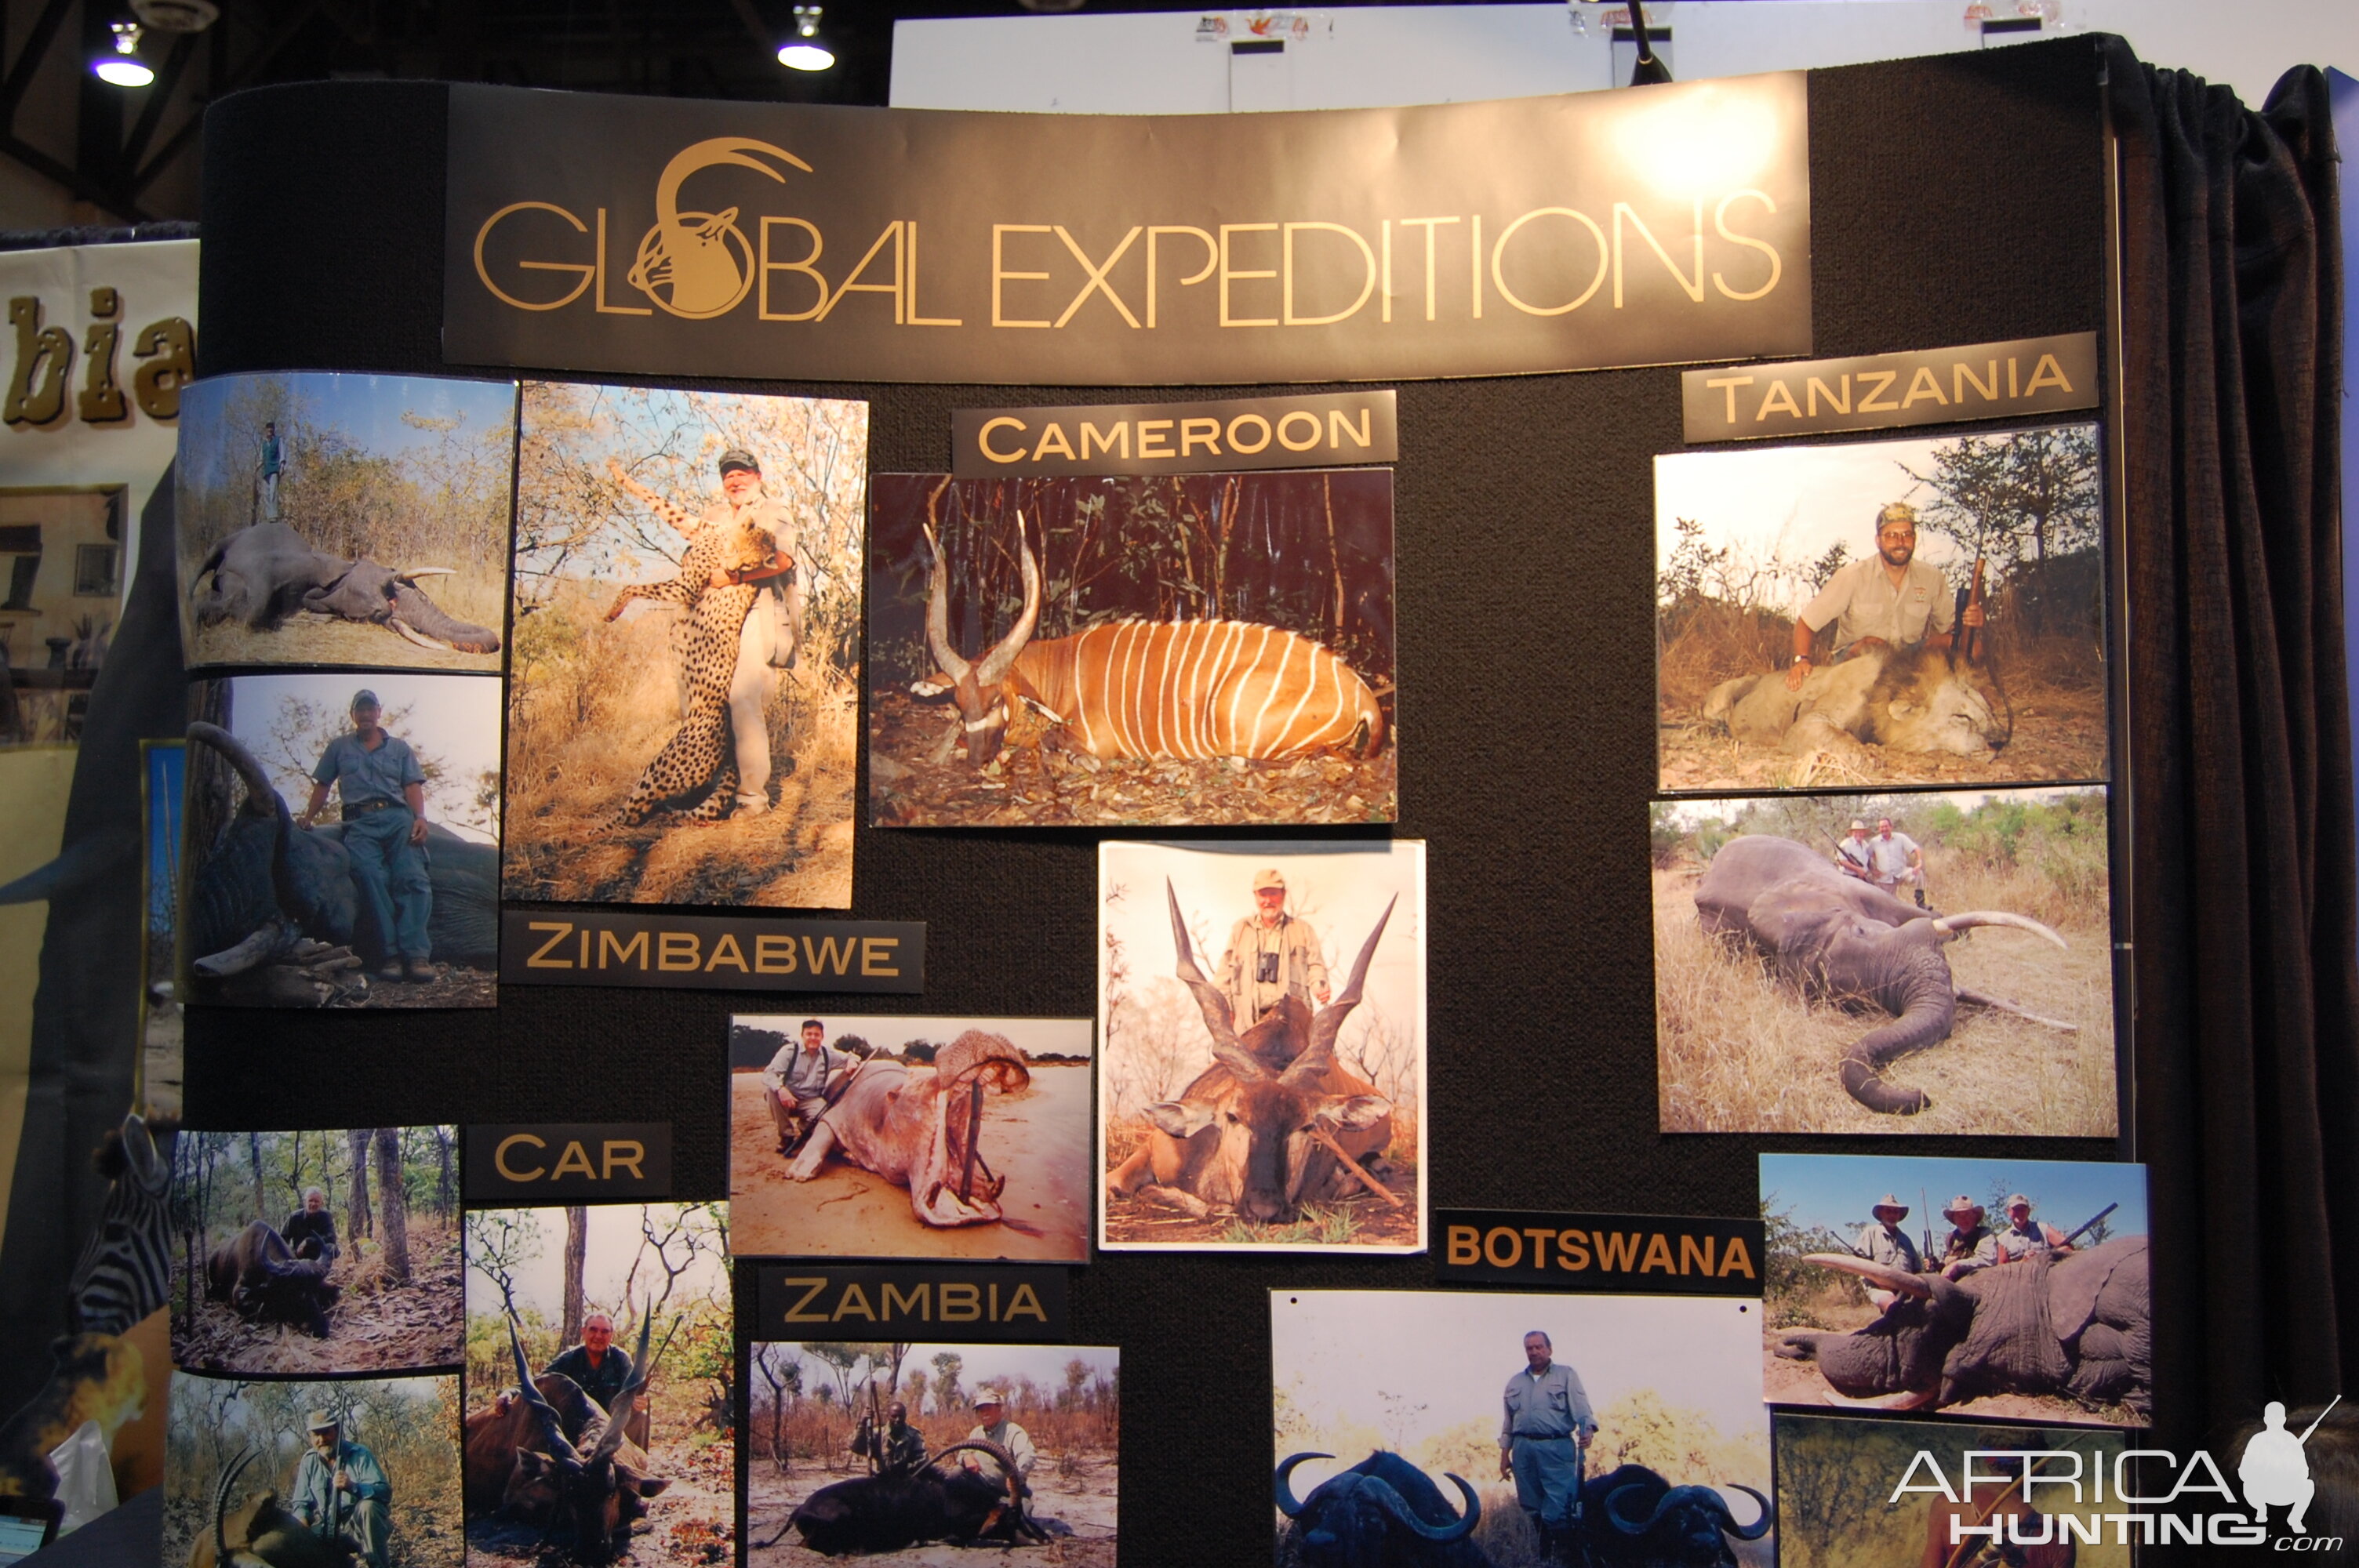 Global Expeditions